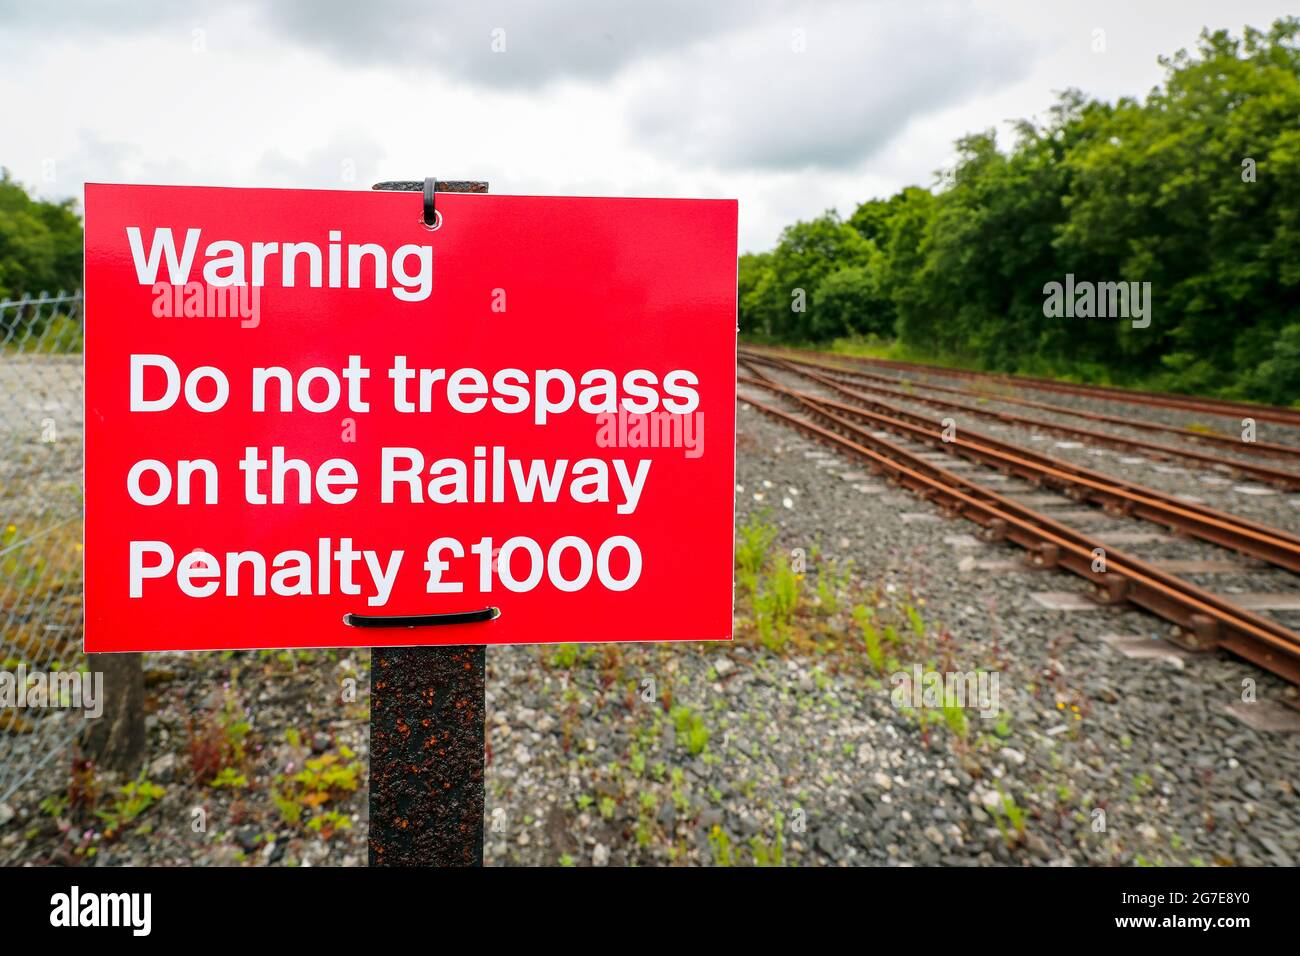 warning sign prohibiting trespass and financial penalty for walking on the railway lines. Stock Photo